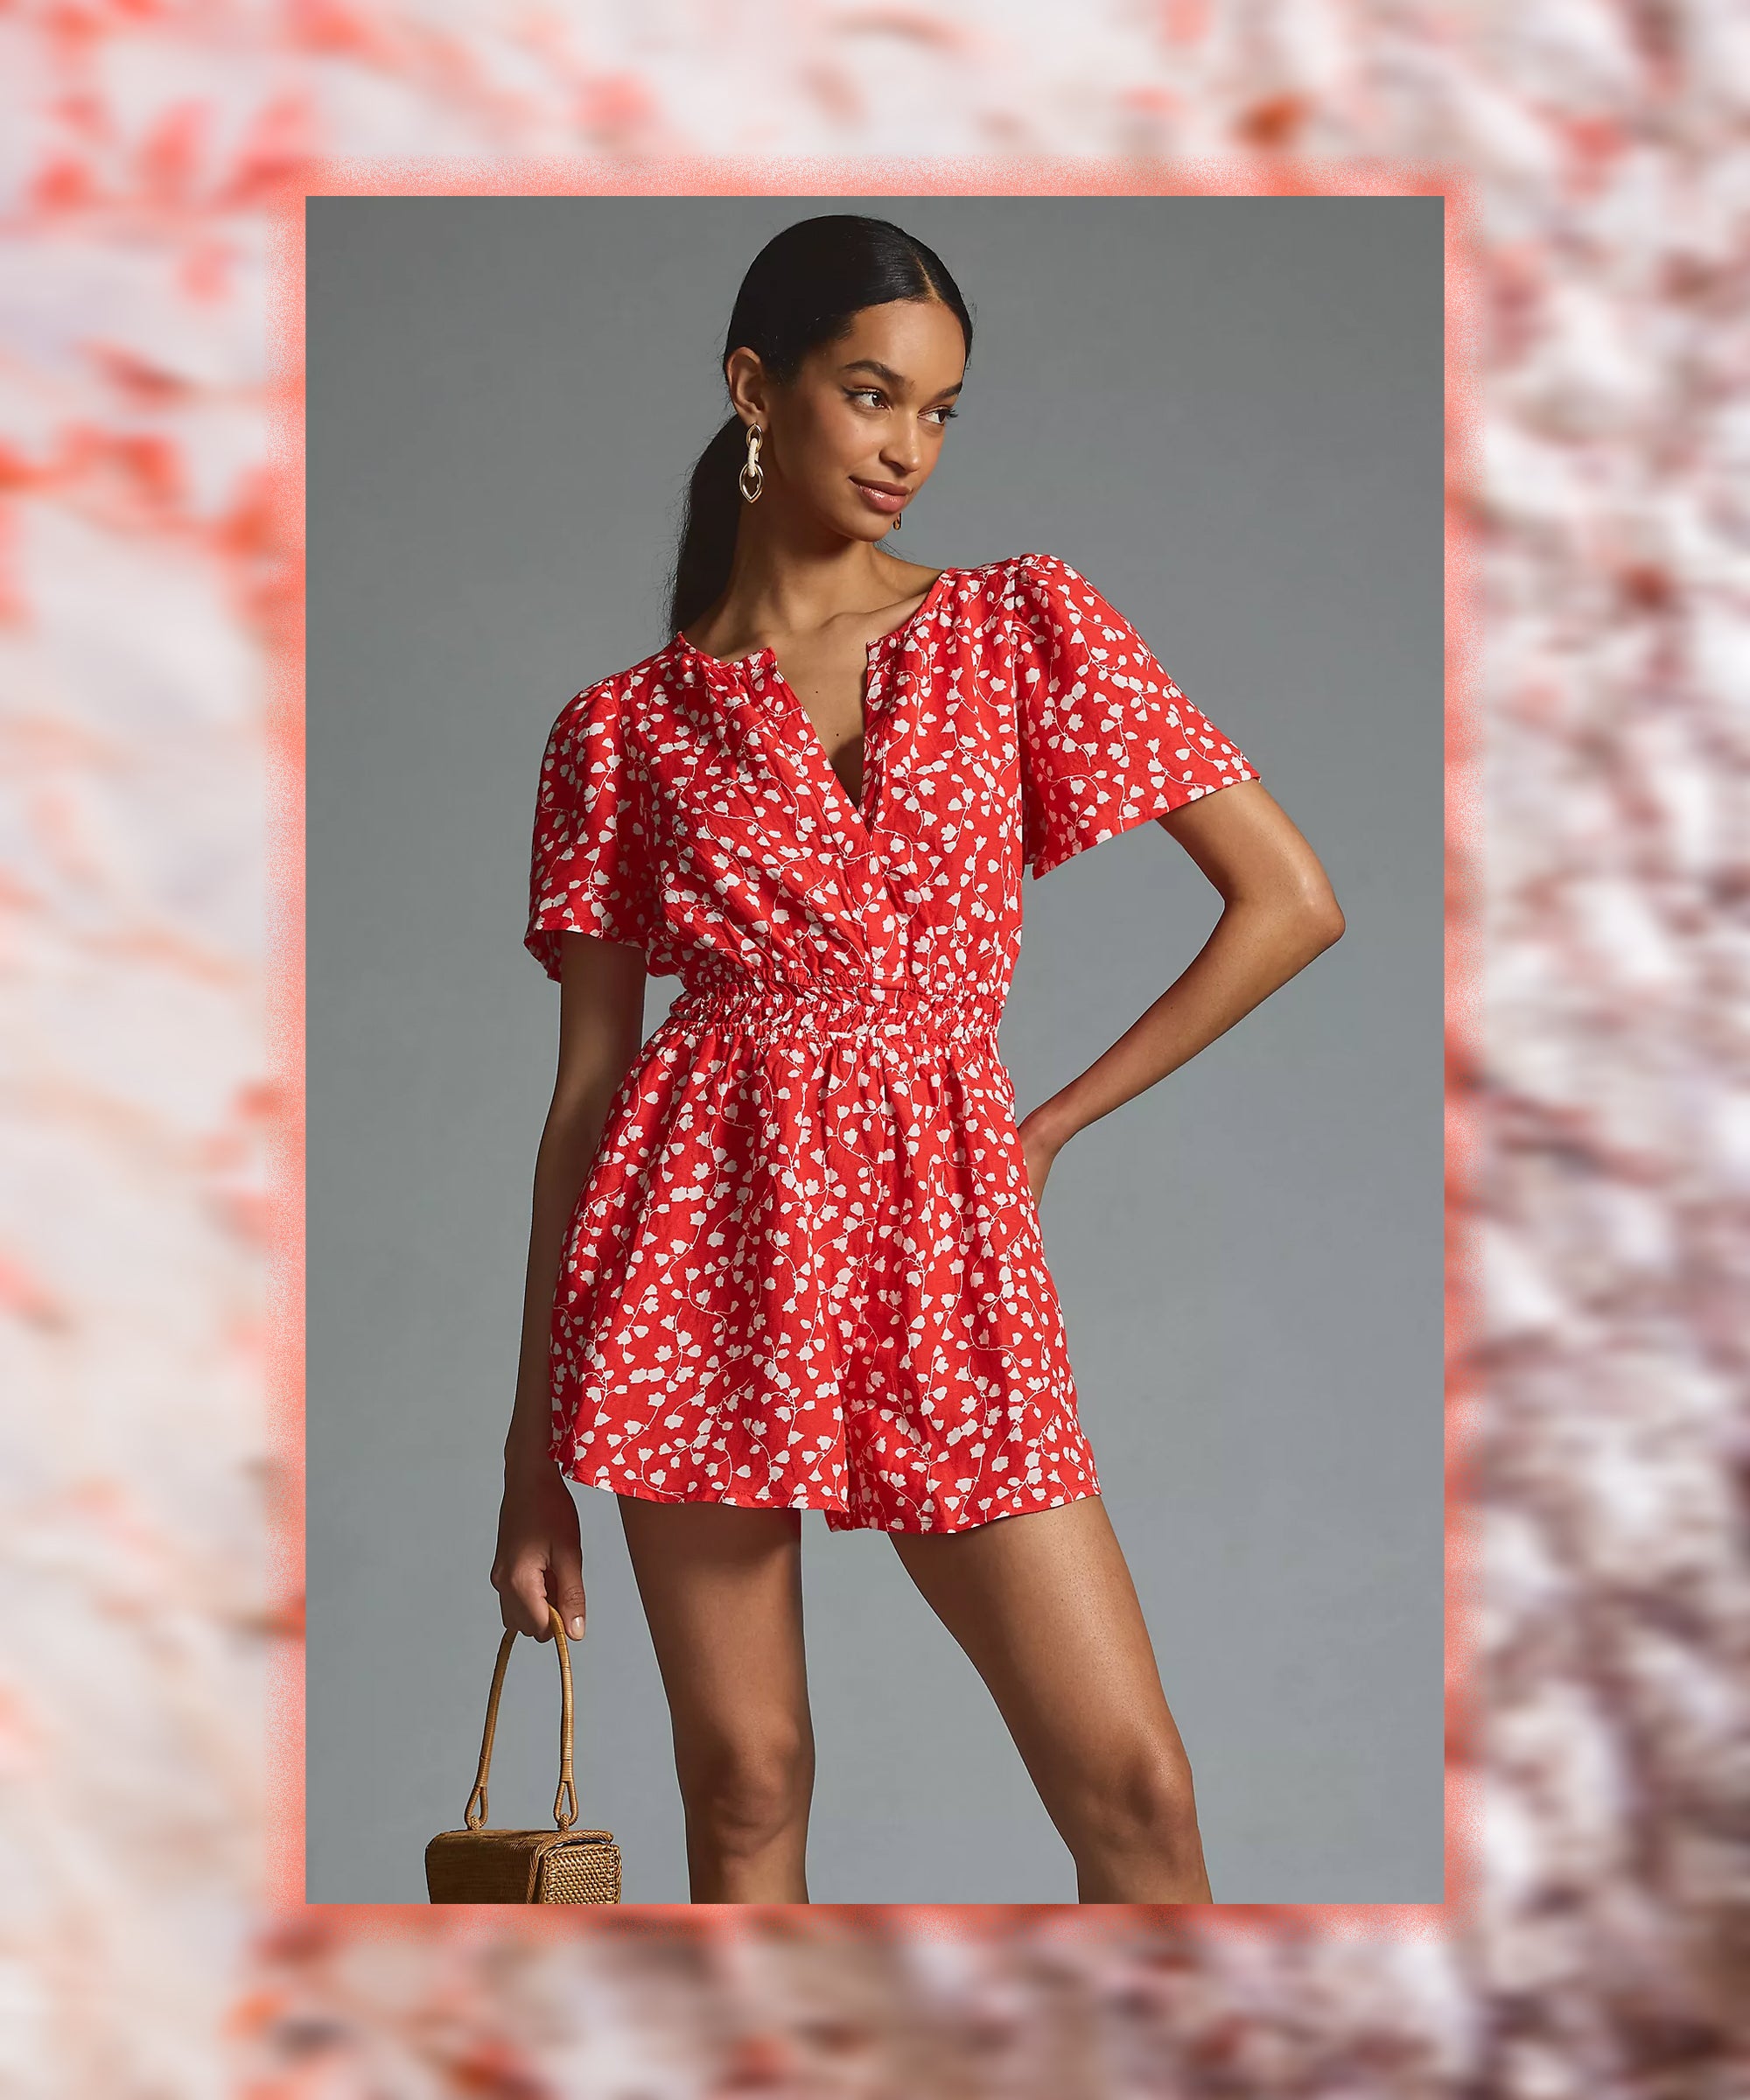 Rompers: The hottest trend for effortless summer fashion